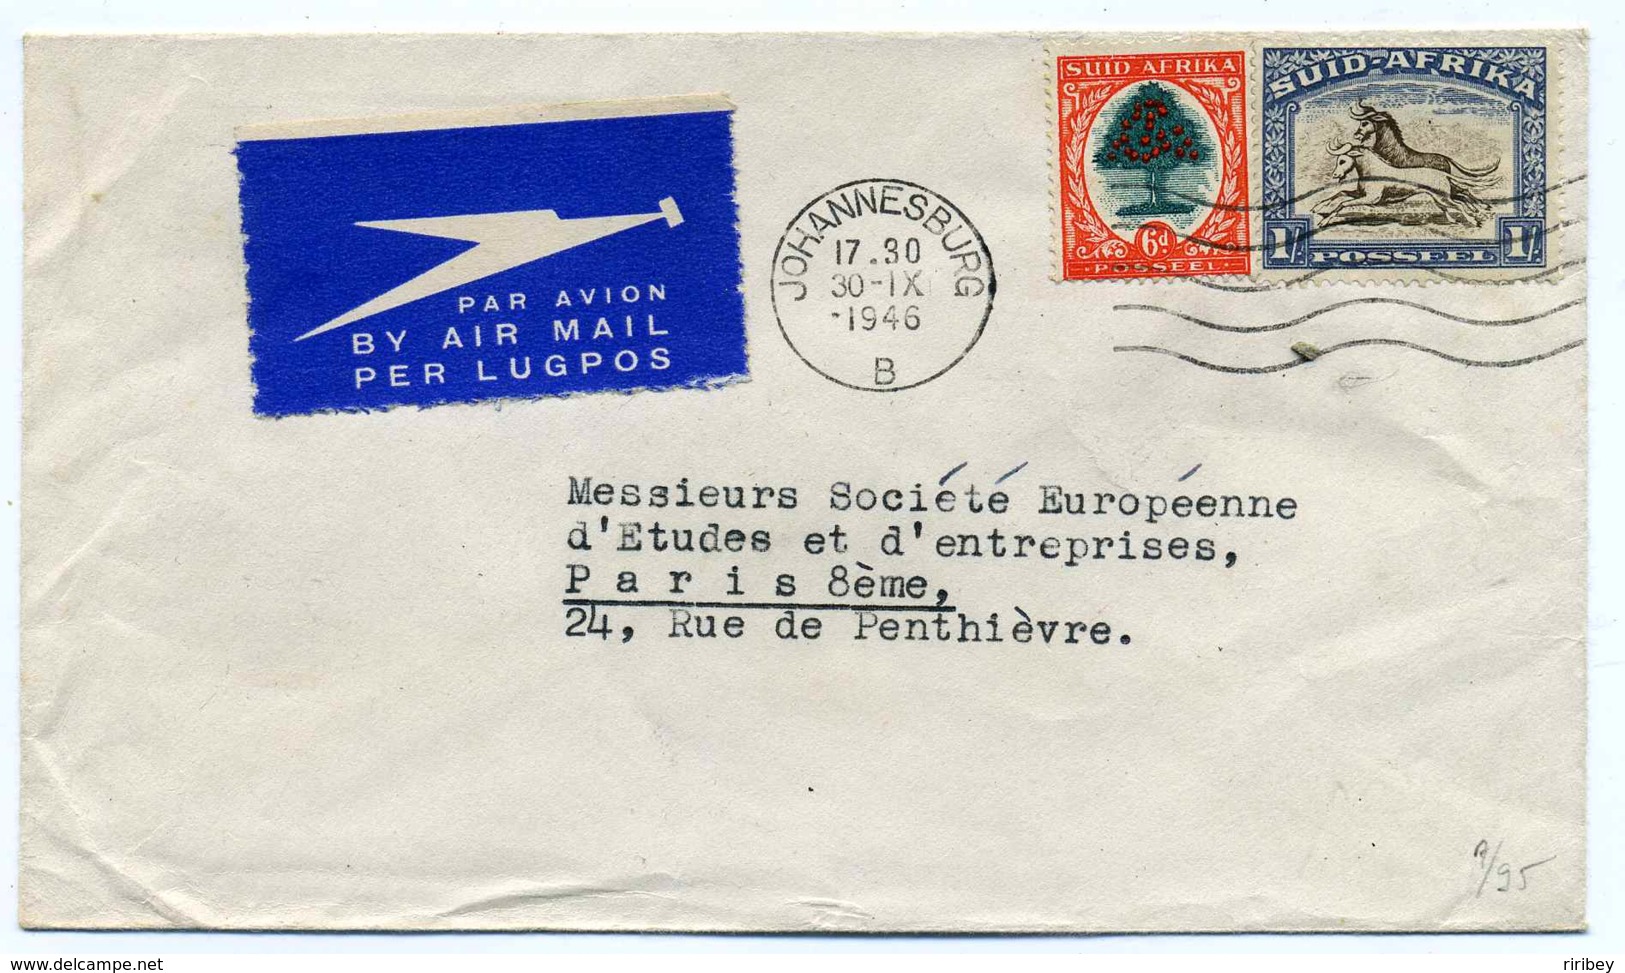 AIR MAIL COVER / JOHANNESBURG - SUID AFRICA / 1946 / To France - Luftpost